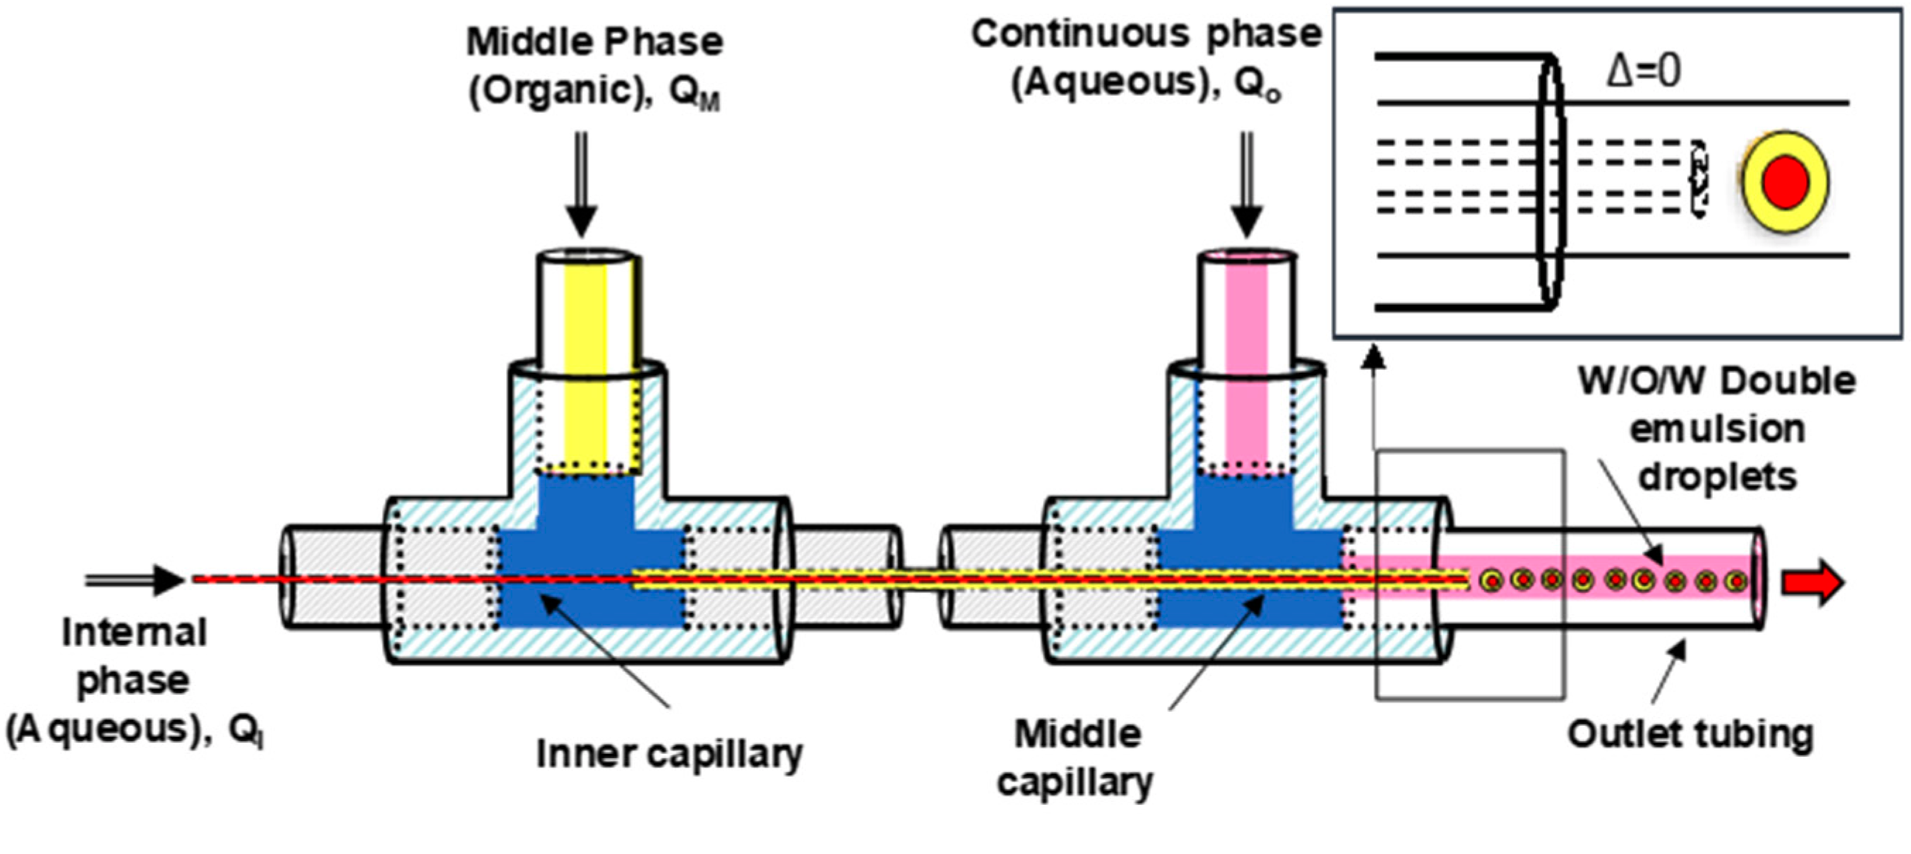 Scheme of the microfluidic system formed by two coaxial capillaries used for the production of Trojan MPs by double emulsion.